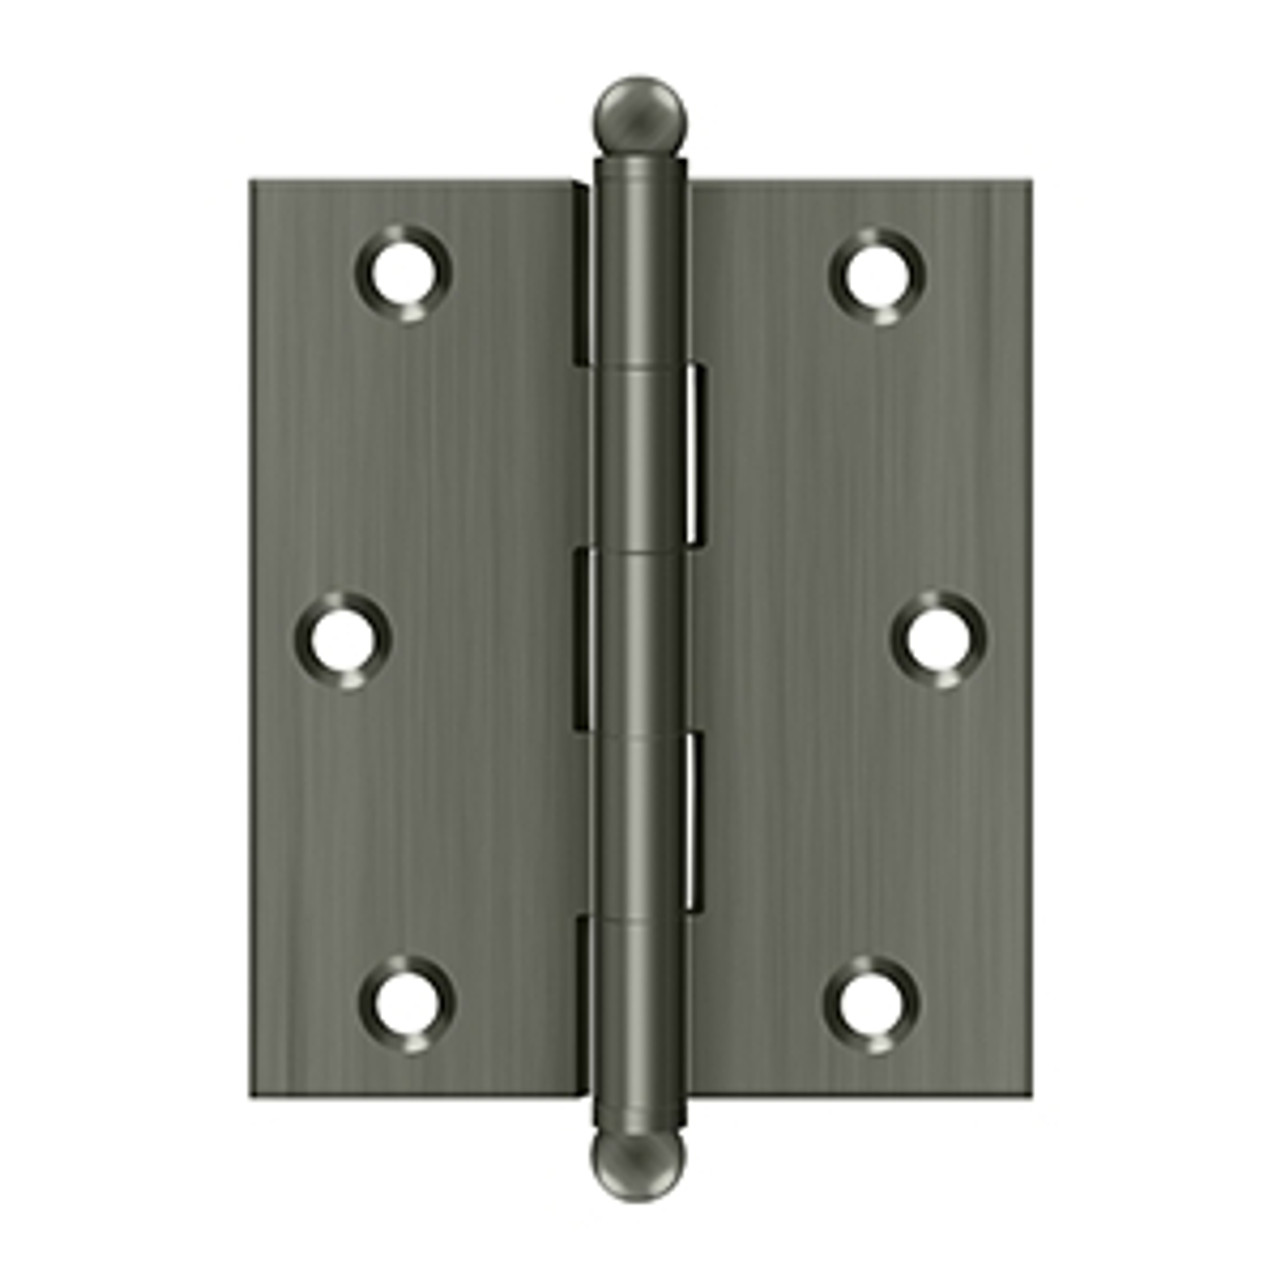 2-1/2 Ball-Tip Cabinet Hinges